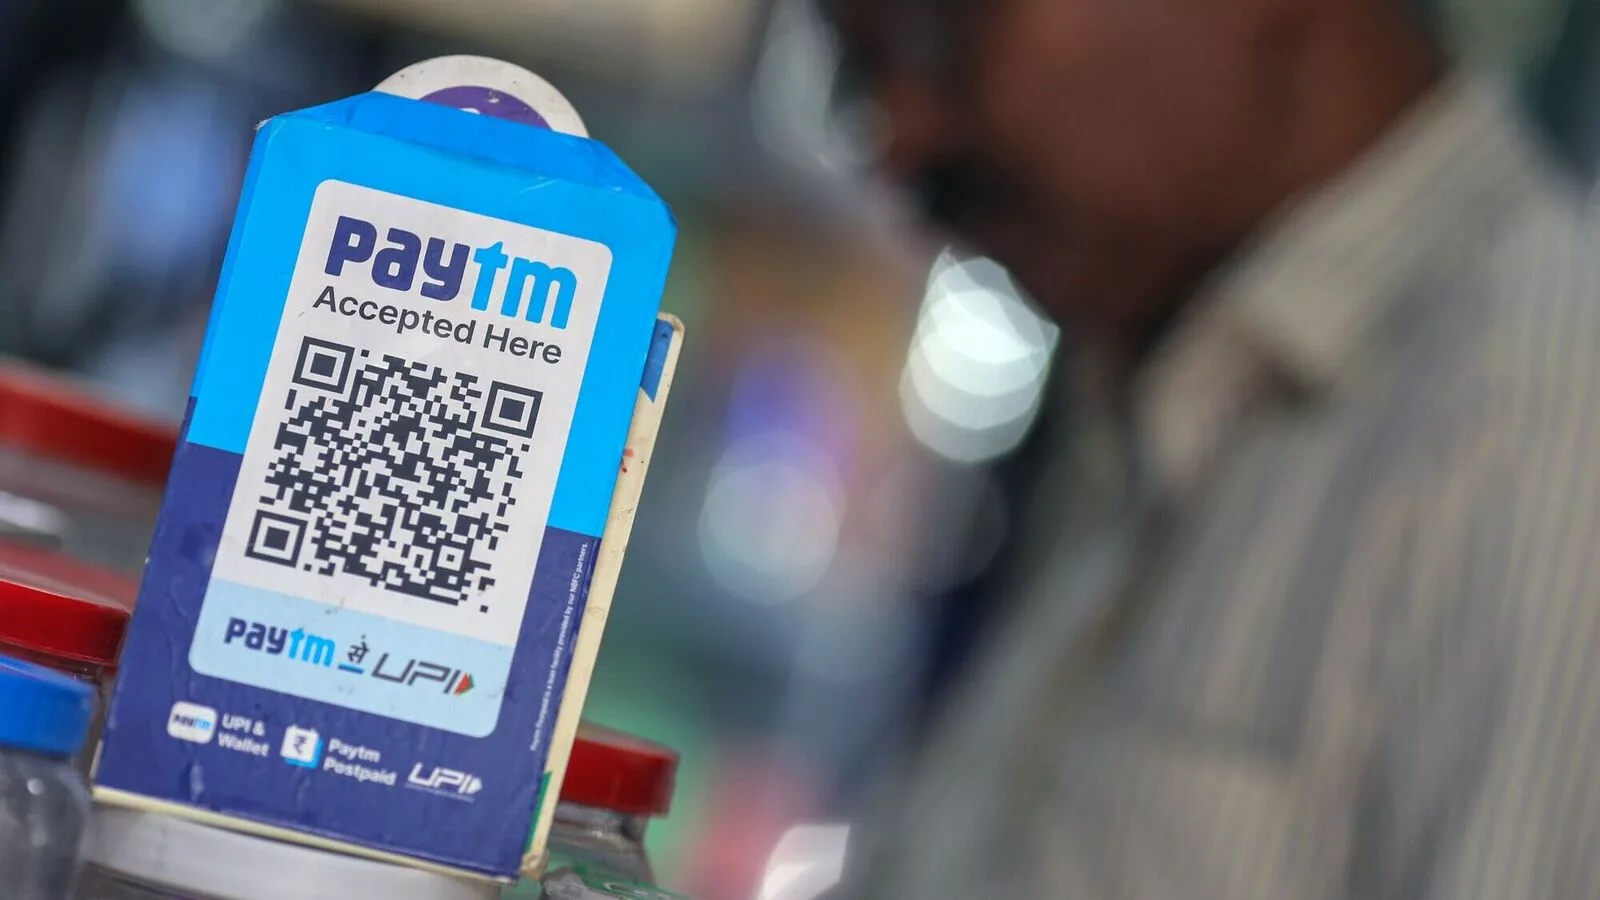 Brokerage firm Bernstein rates Paytm ‘outperform’ with a target price of ₹600/share